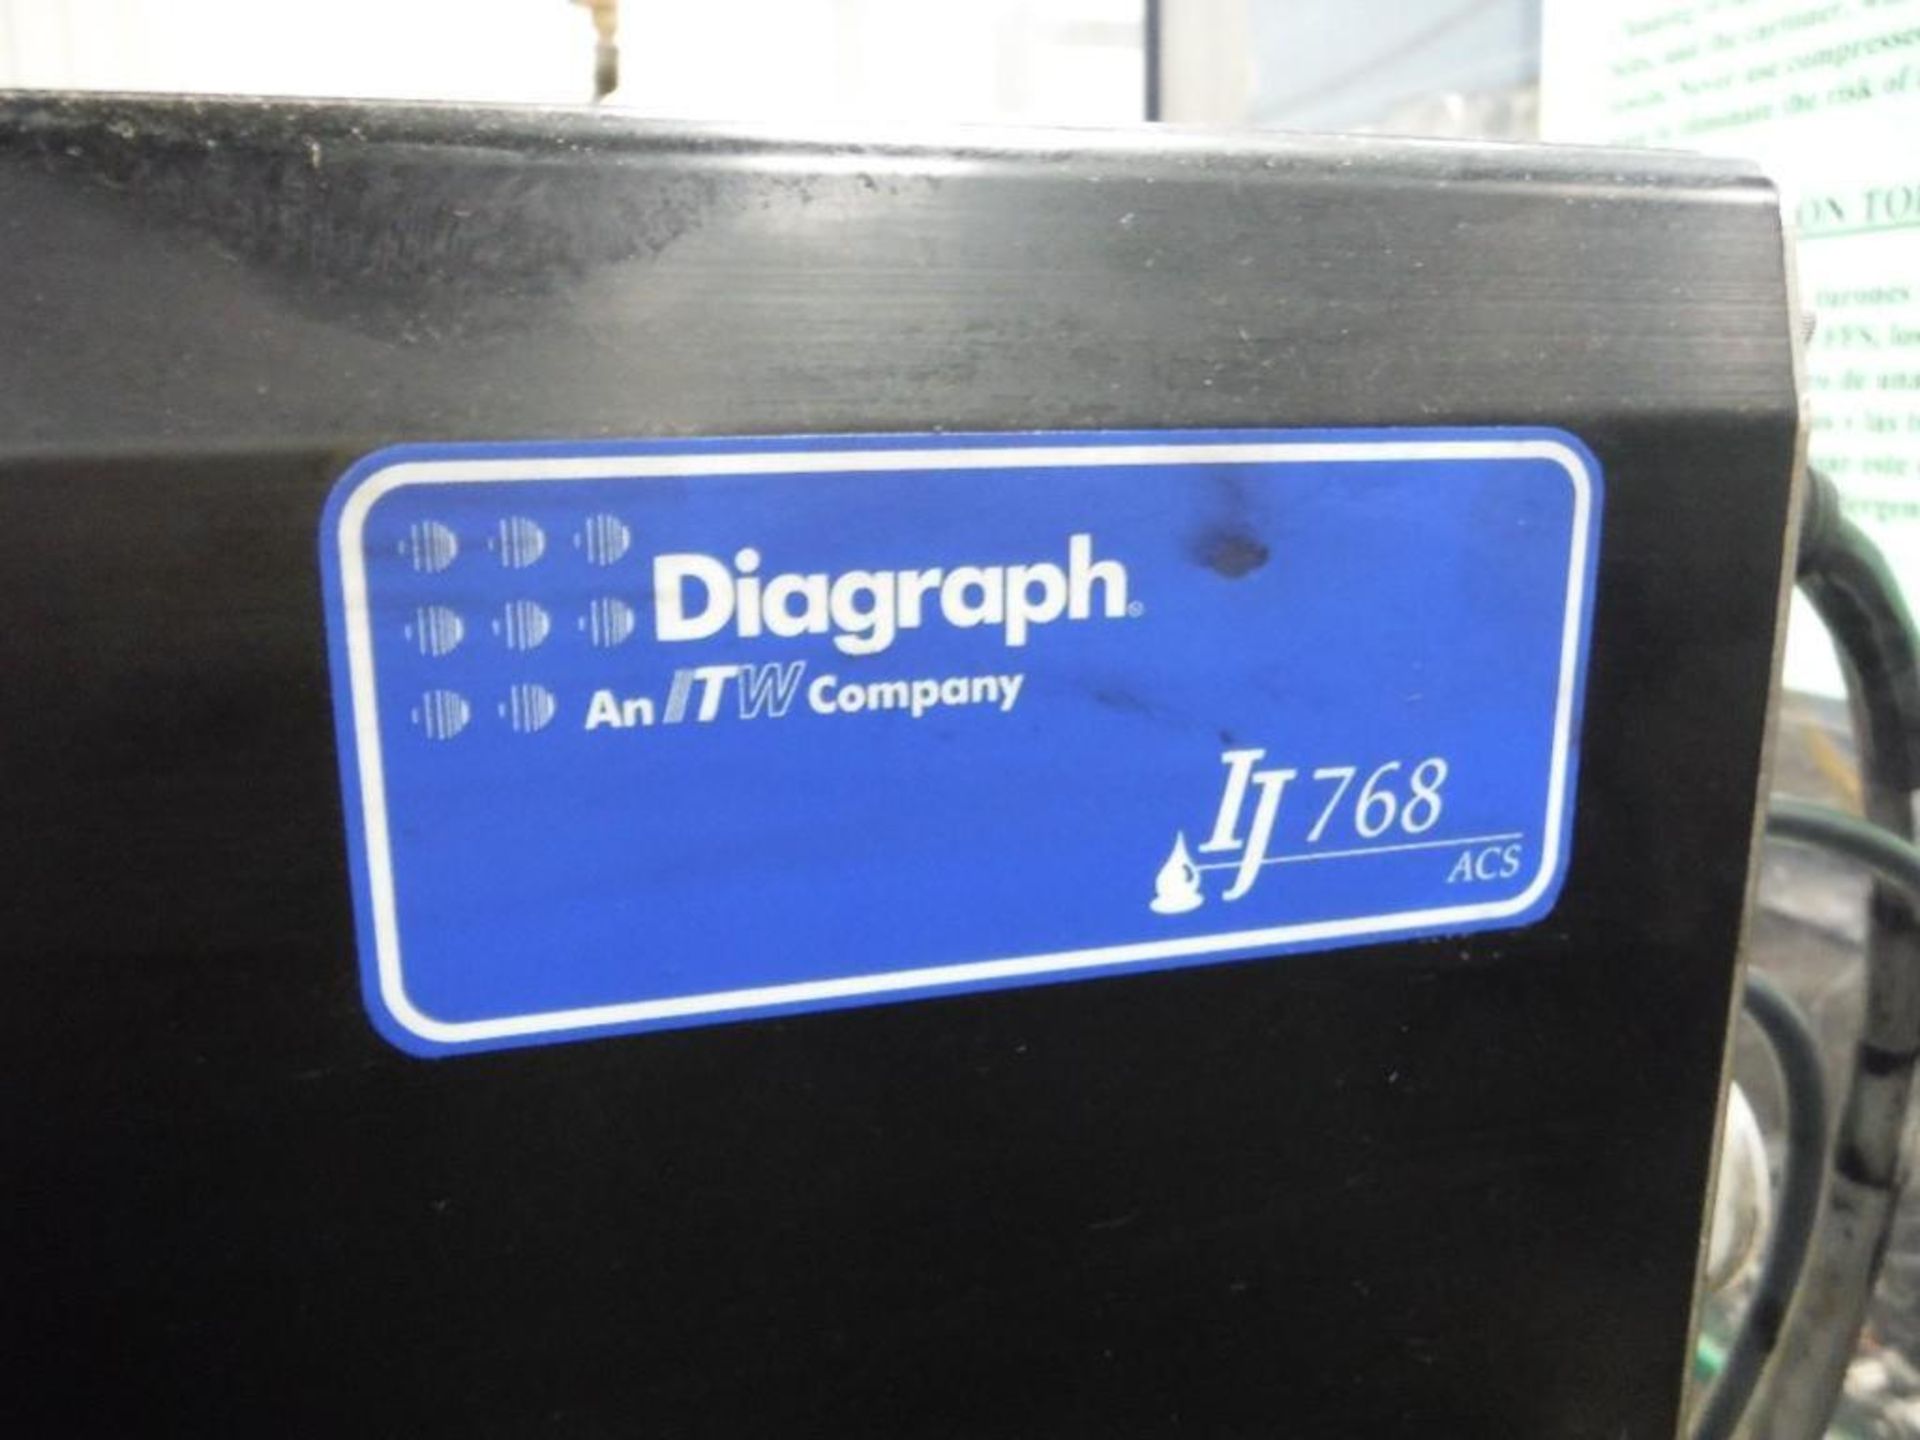 Diagraph IJ3000 xls ink jet coder with conveyor bed, 92 in. long x 27 in. wide x 40 in. tall, steel - Image 7 of 7